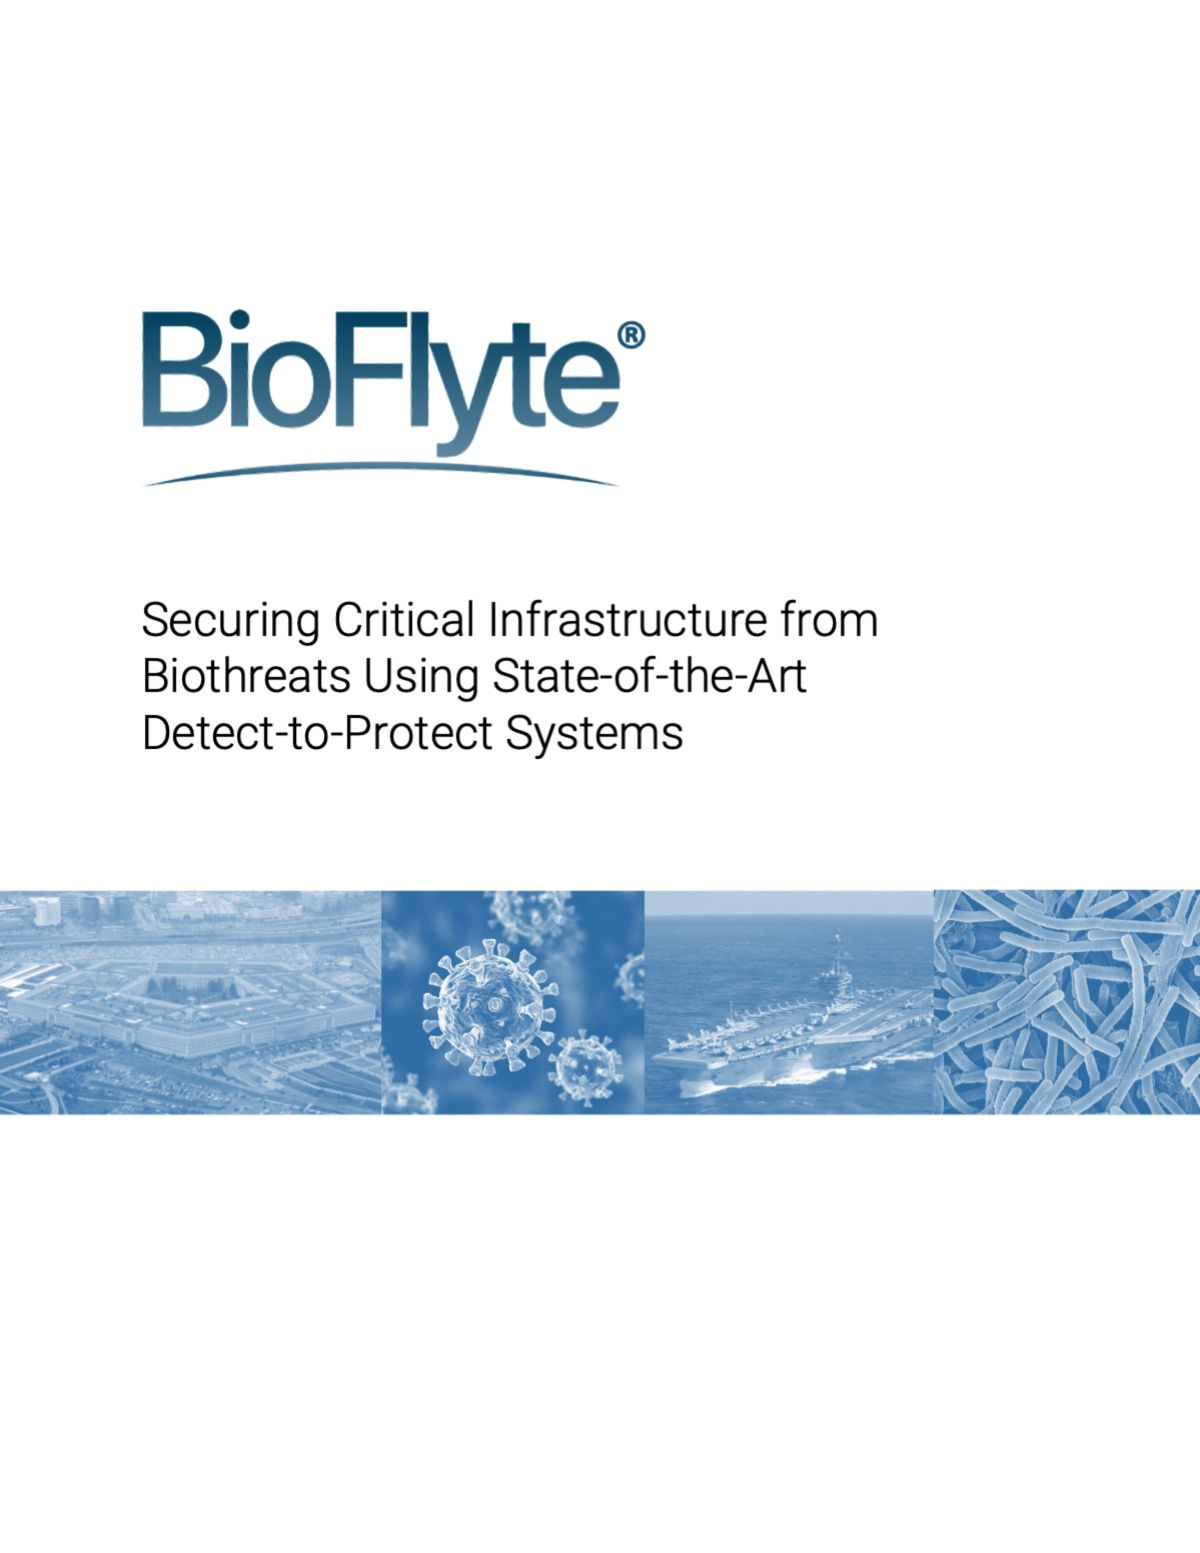 BioFlyte_Whitepaper_Securing-Critical-Infrastructure_9.1.22